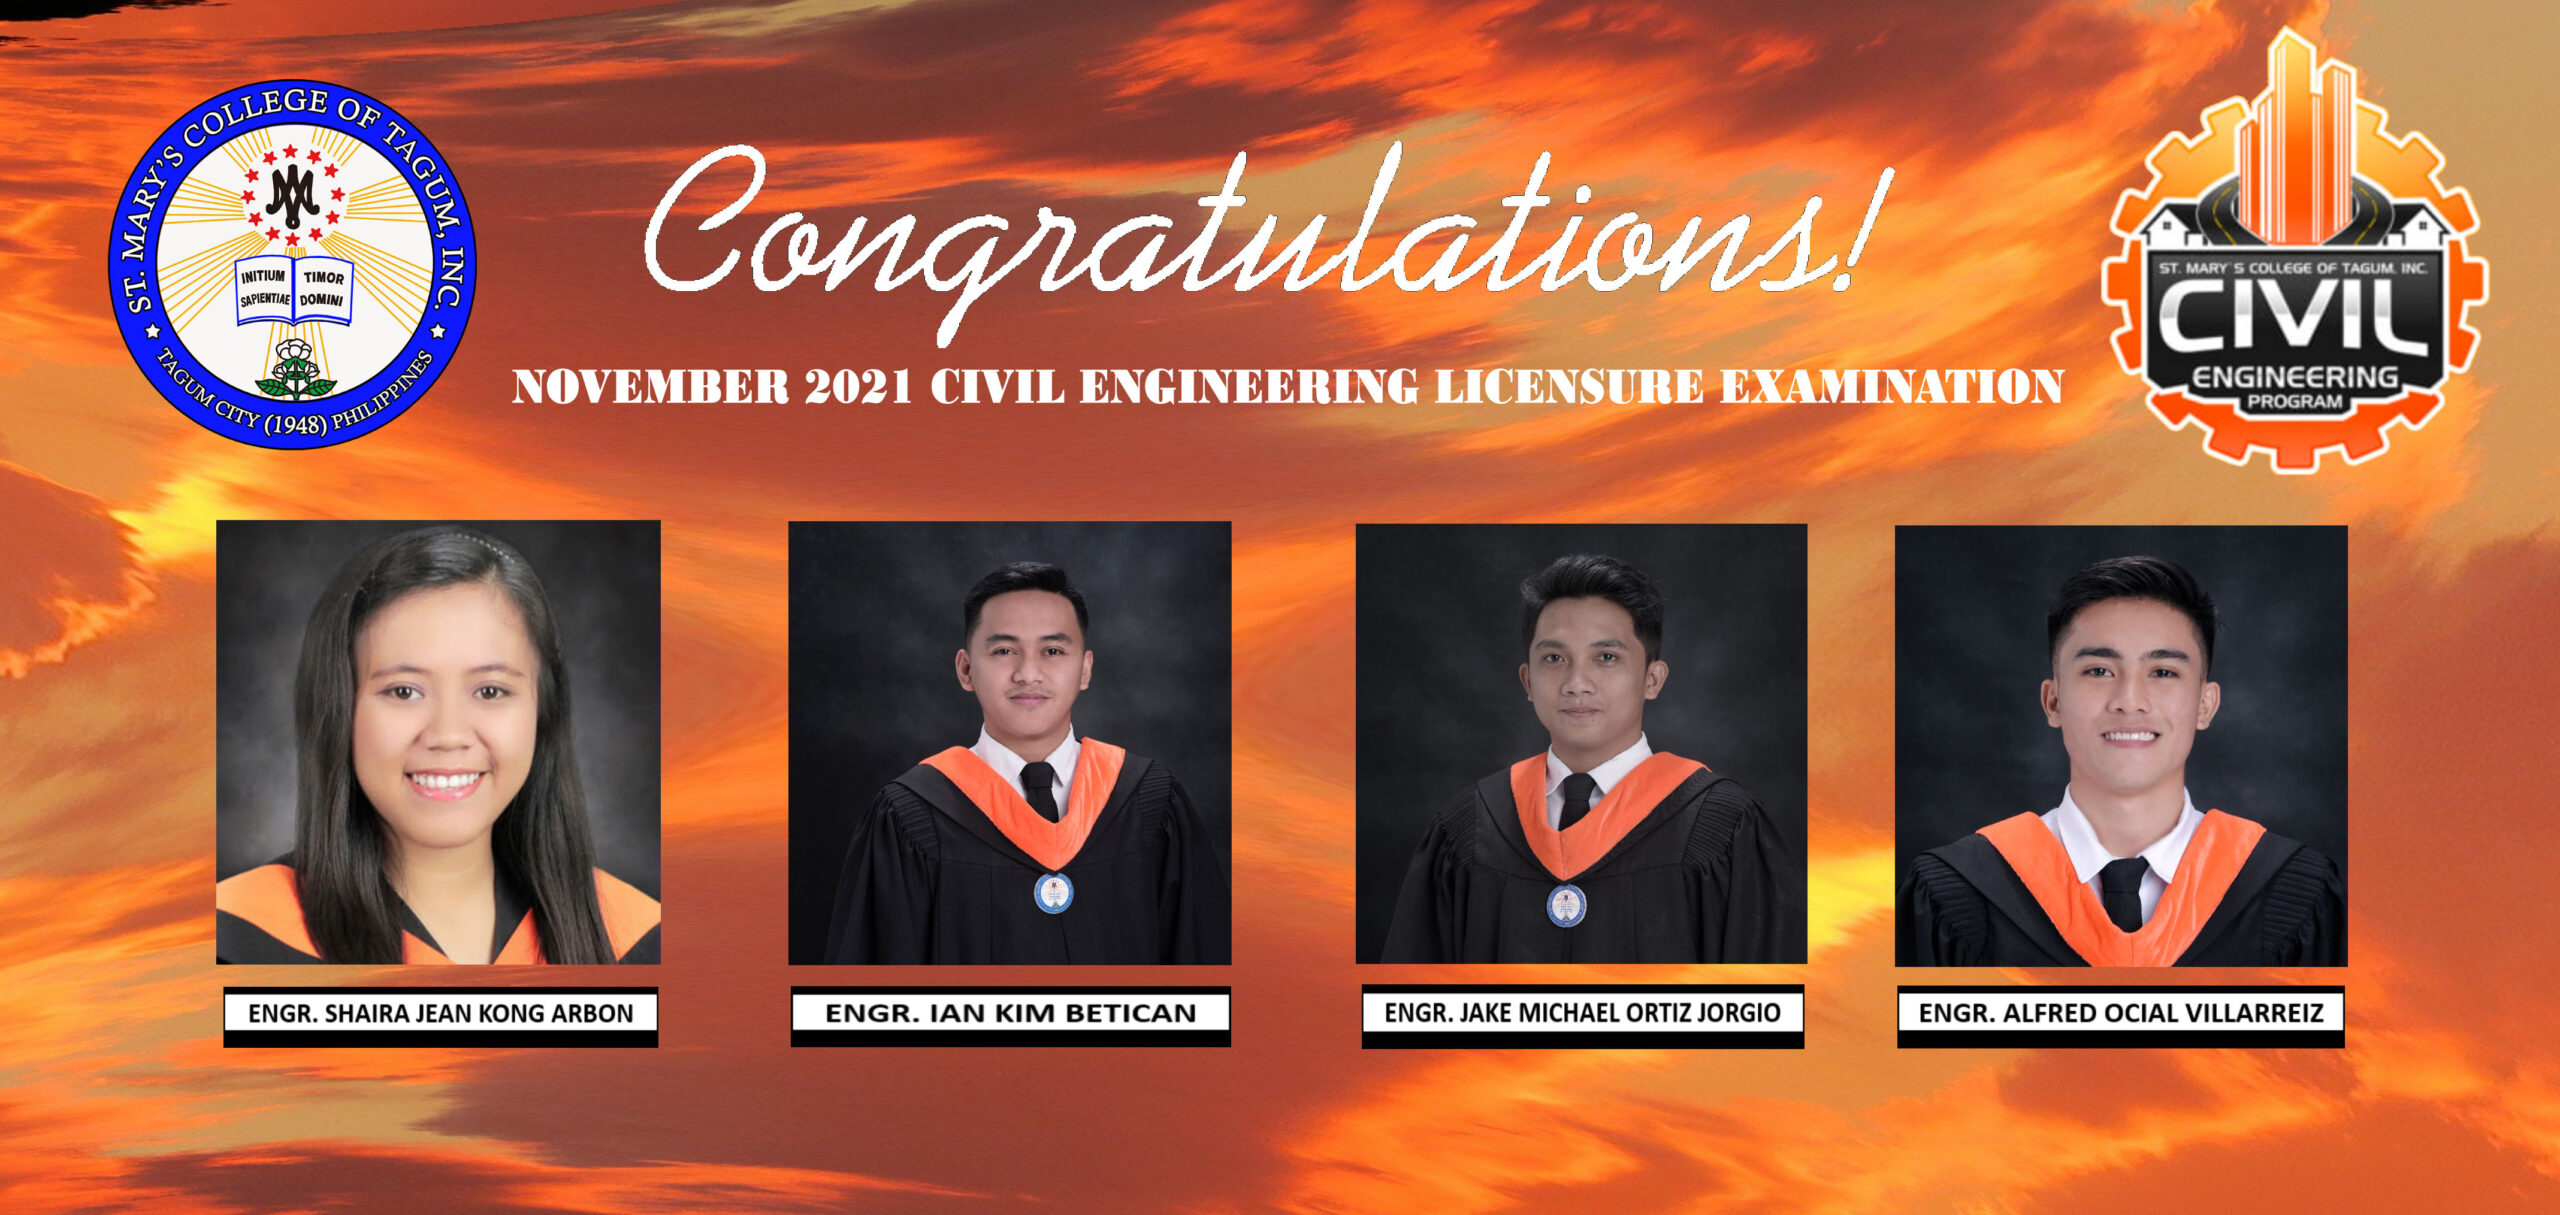 NOVEMBER 2021 CIVIL ENGINEERING BOARD PASSERS St. Mary's College of